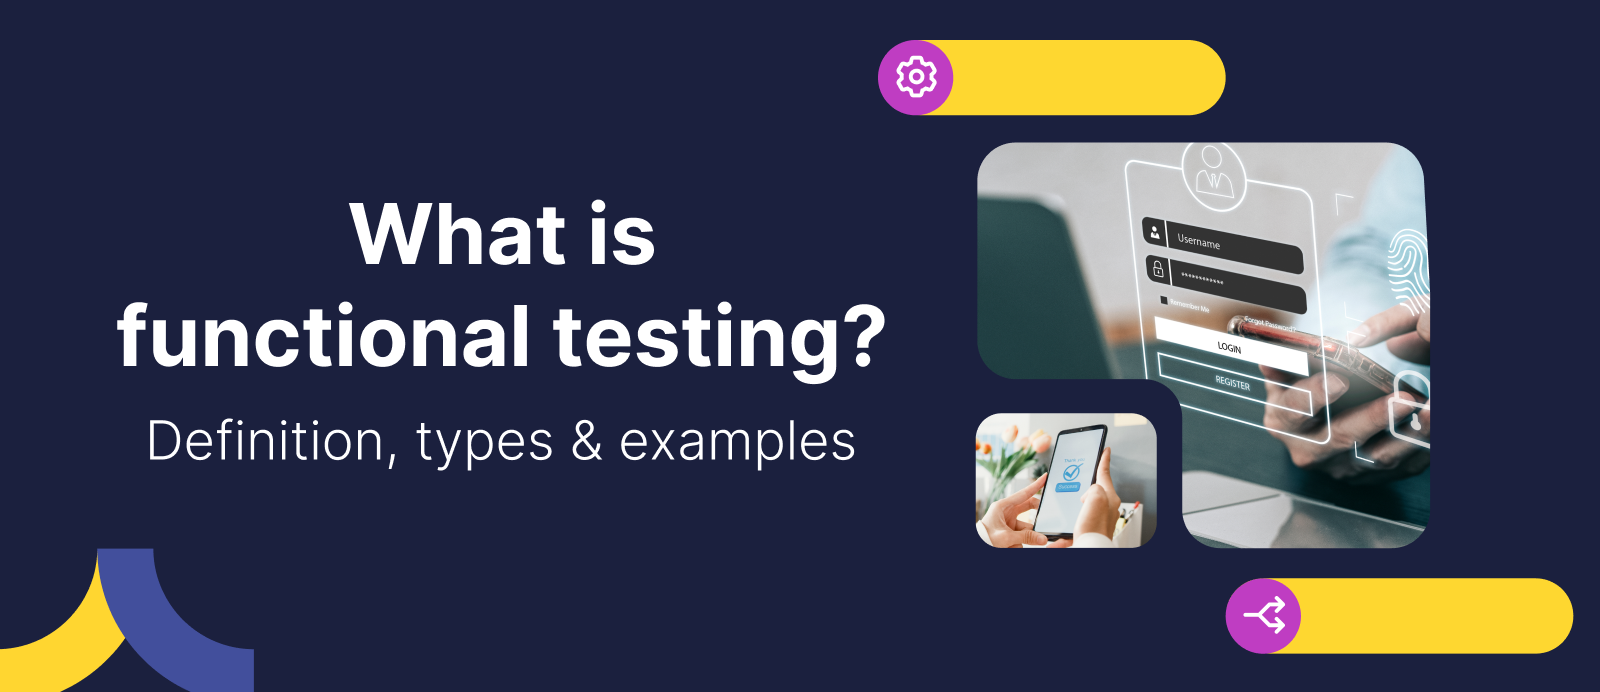 Functional testing in software testing - functional testing types and examples Katalon